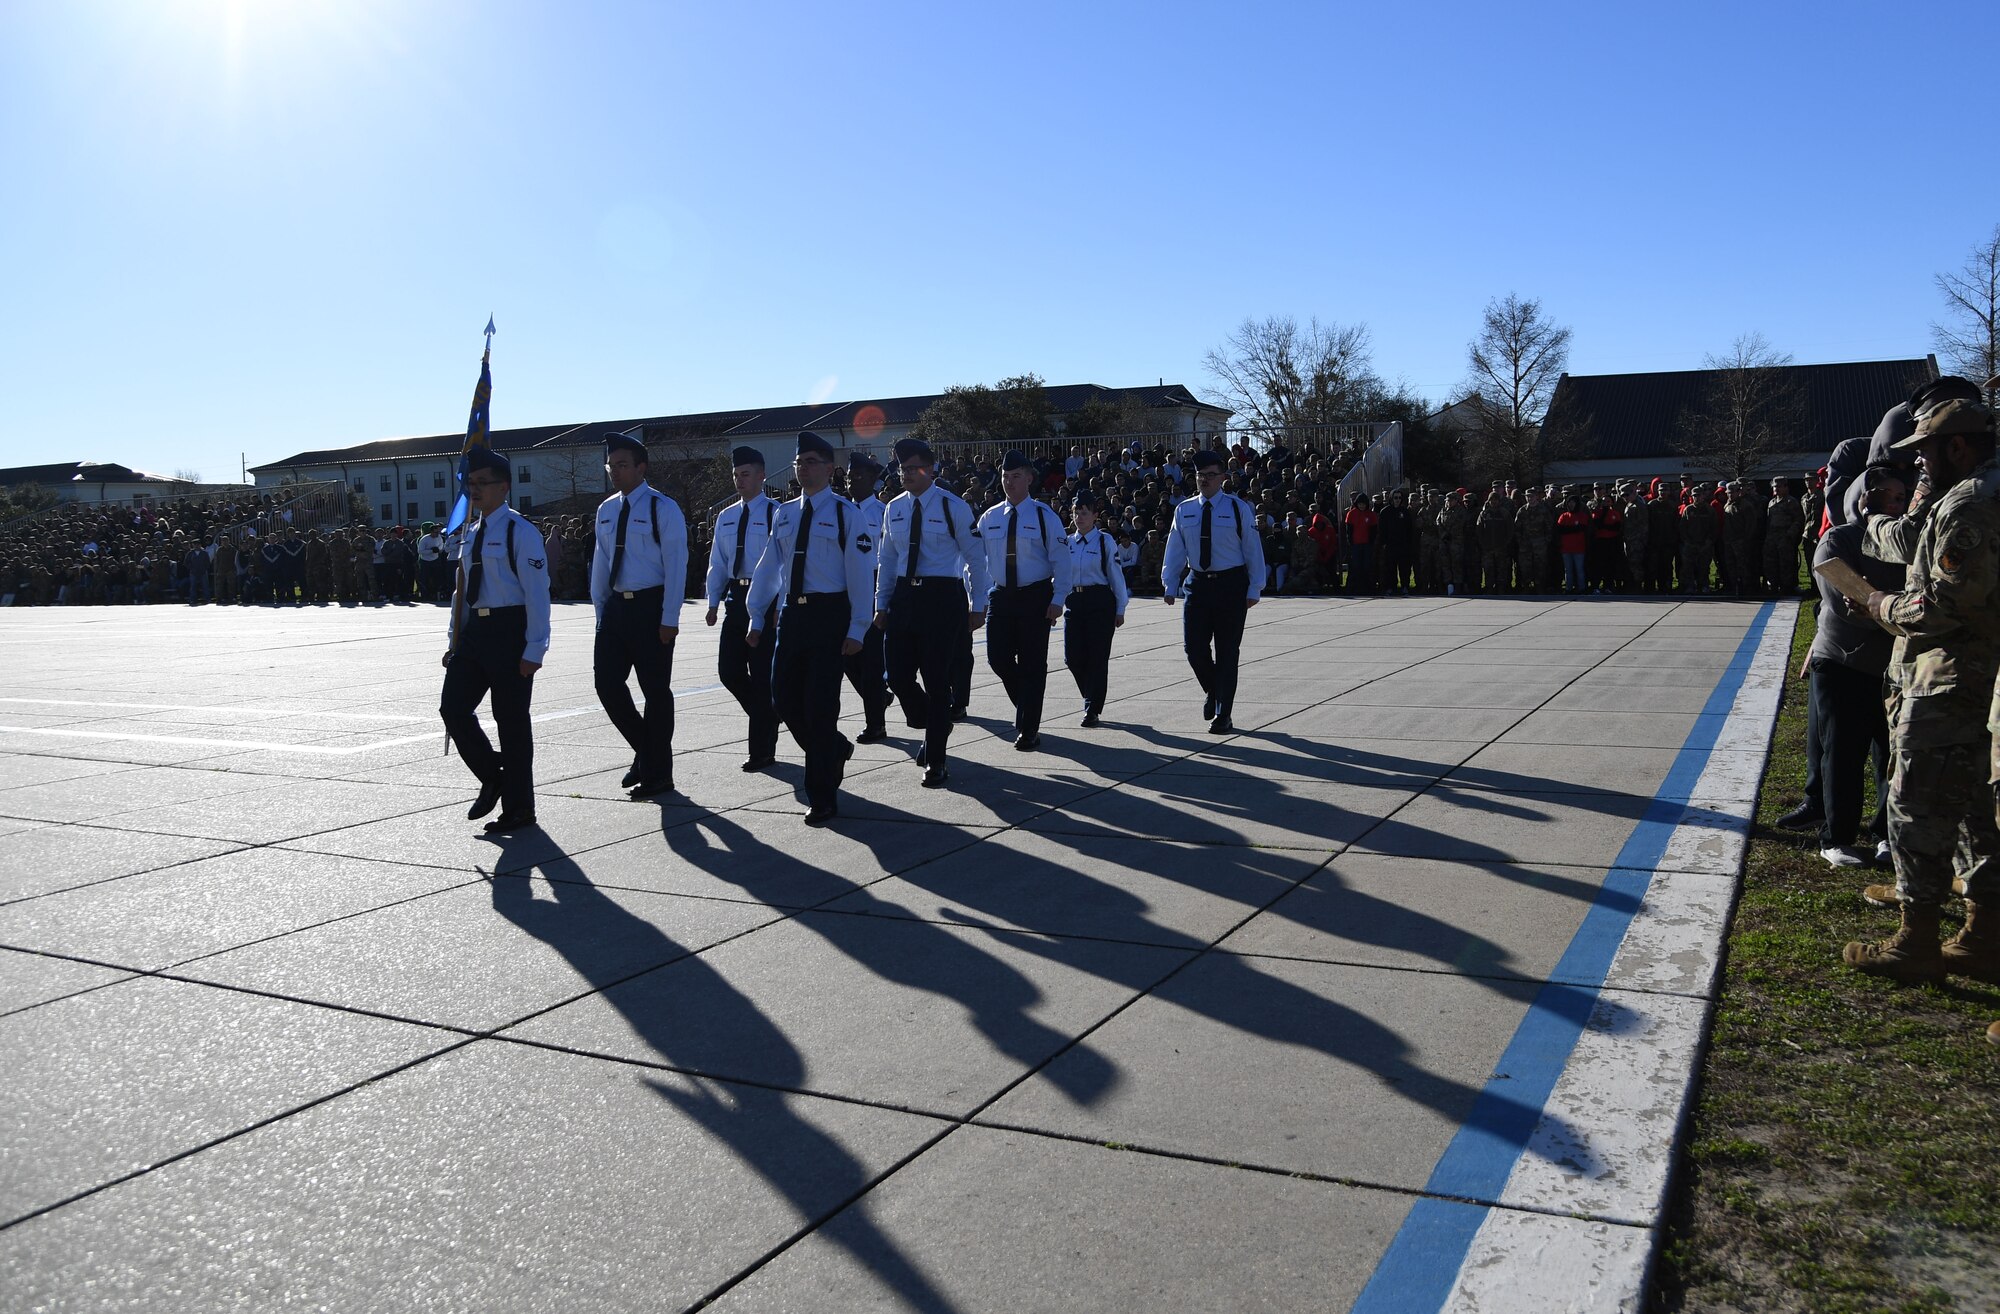 Members of the 338th Training Squadron regulation drill team perform during the 81st Training Group drill down on the Levitow Training Support Facility drill pad at Keesler Air Force Base, Mississippi, Feb. 23, 2023.